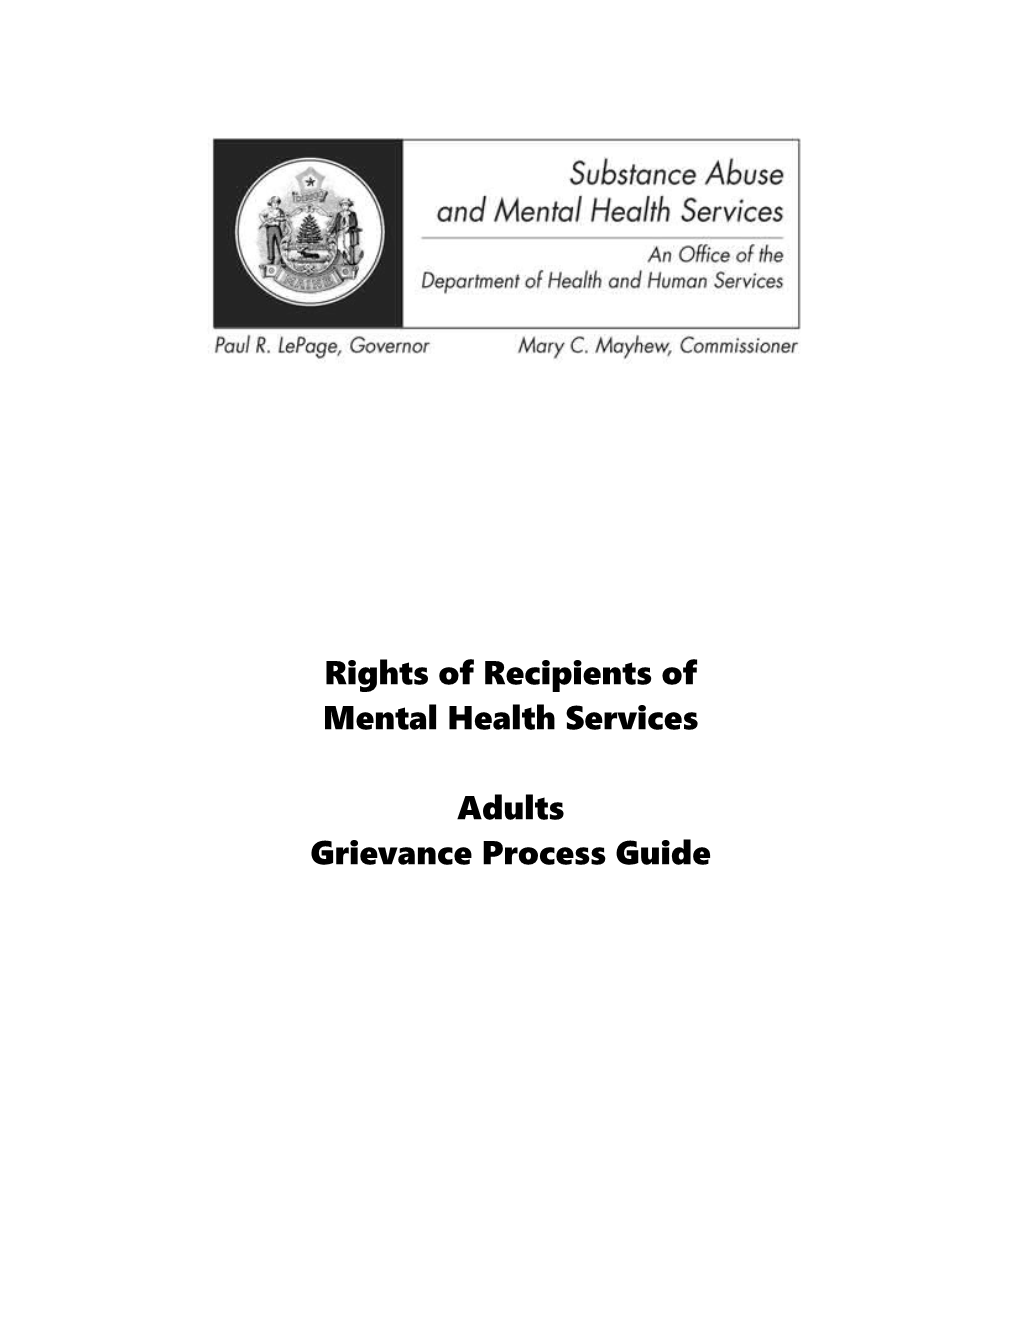 Rights of Recipients Of